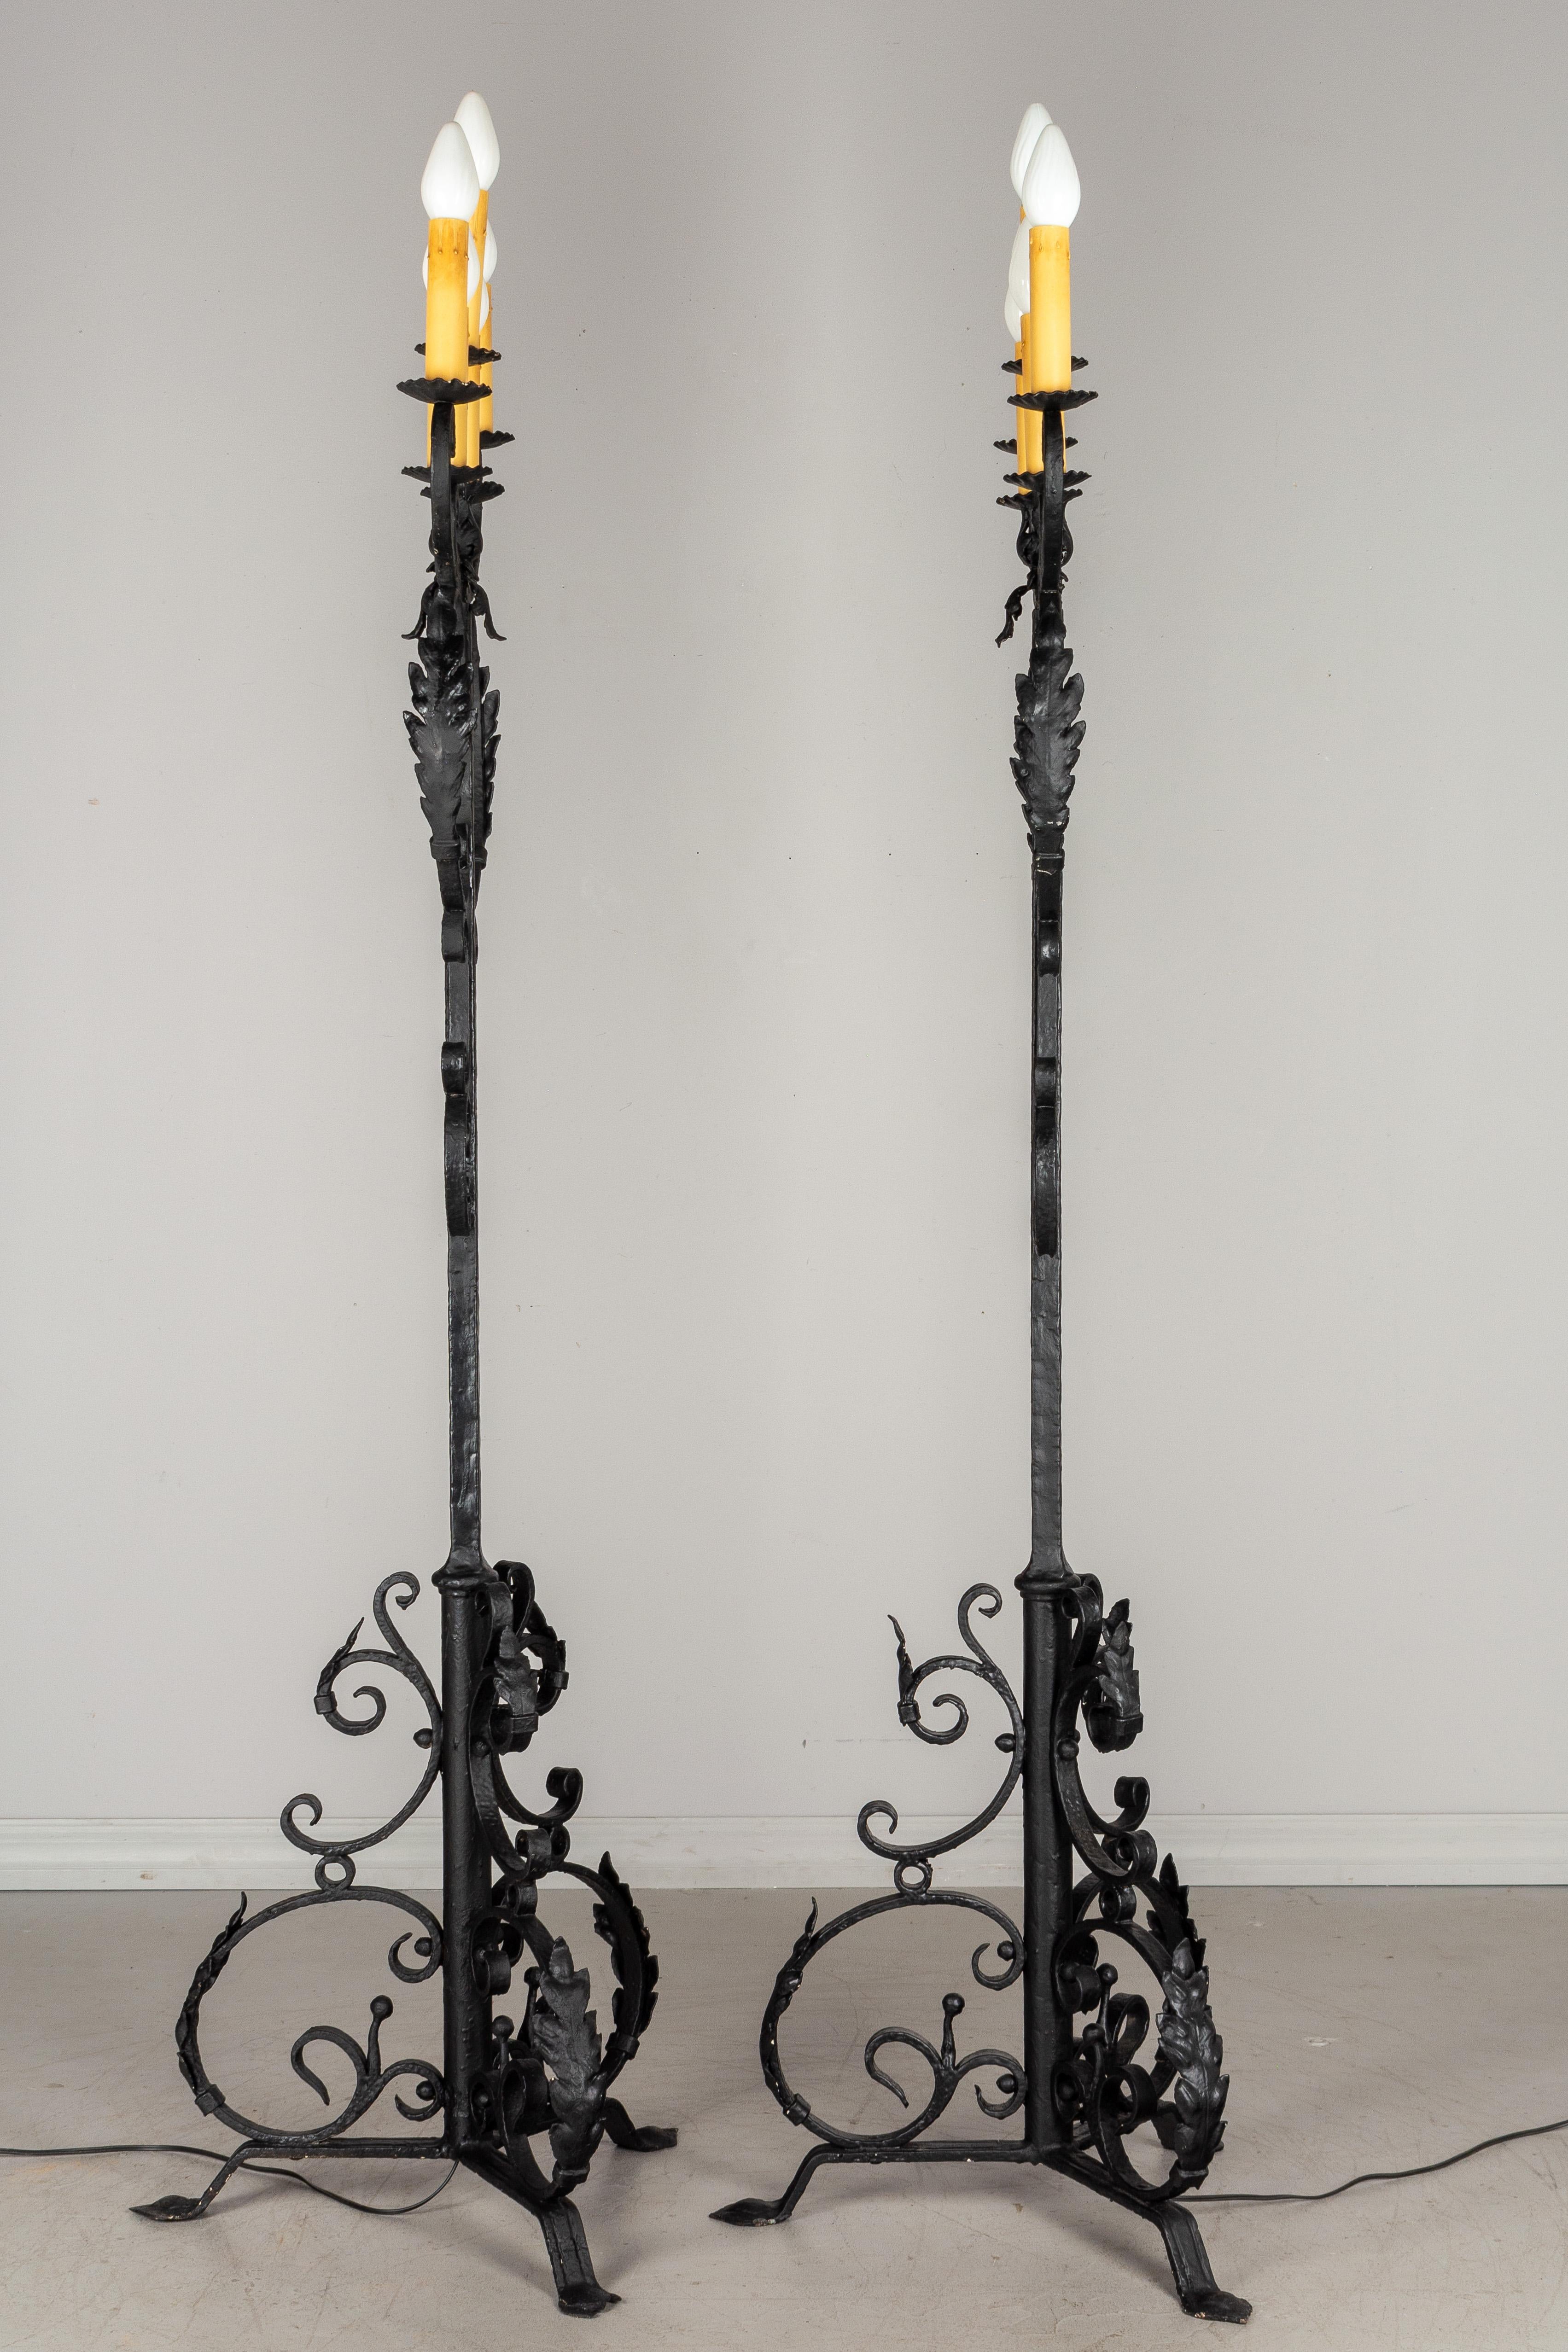 Baroque Revival Pair of 1920s Spanish Revival Wrought Iron Floor Torchères